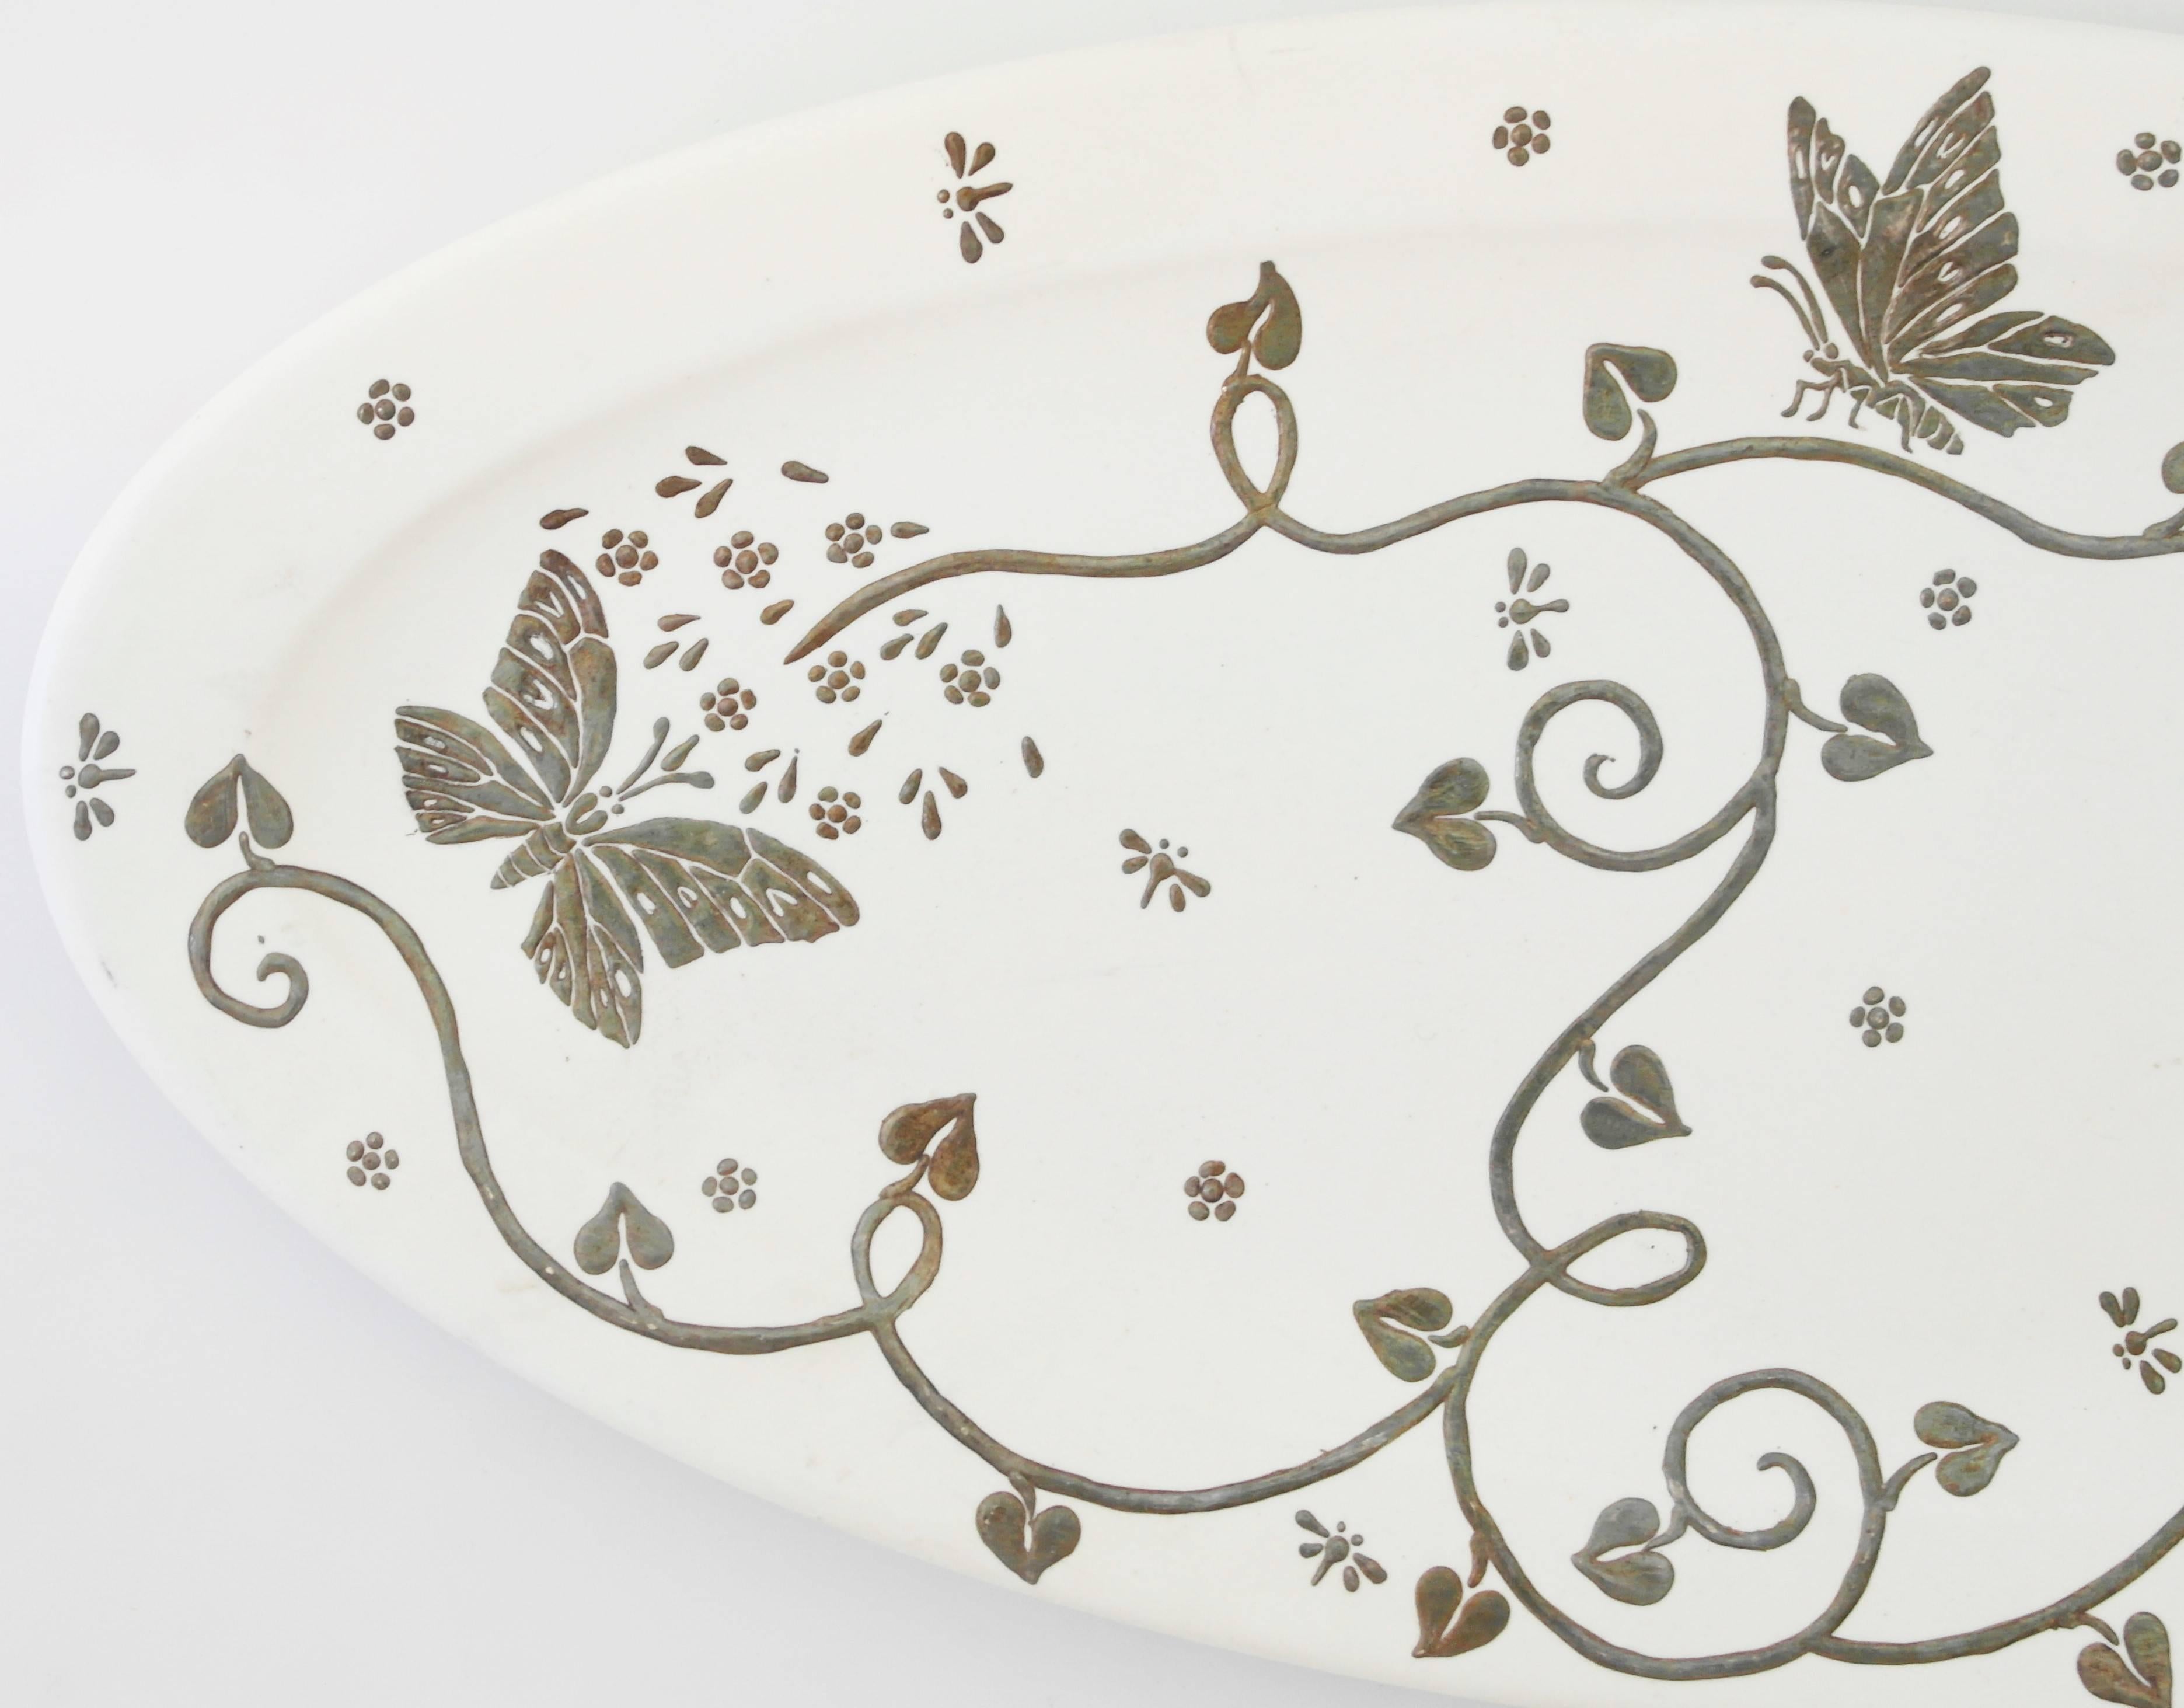 Being offered is a serving plate by Emilia Castillo of Taxco, Mexico. Oval ceramic plate decorated with sterling silver overlay, including butterflies, dragonflies & foliate. Dimensions: 15